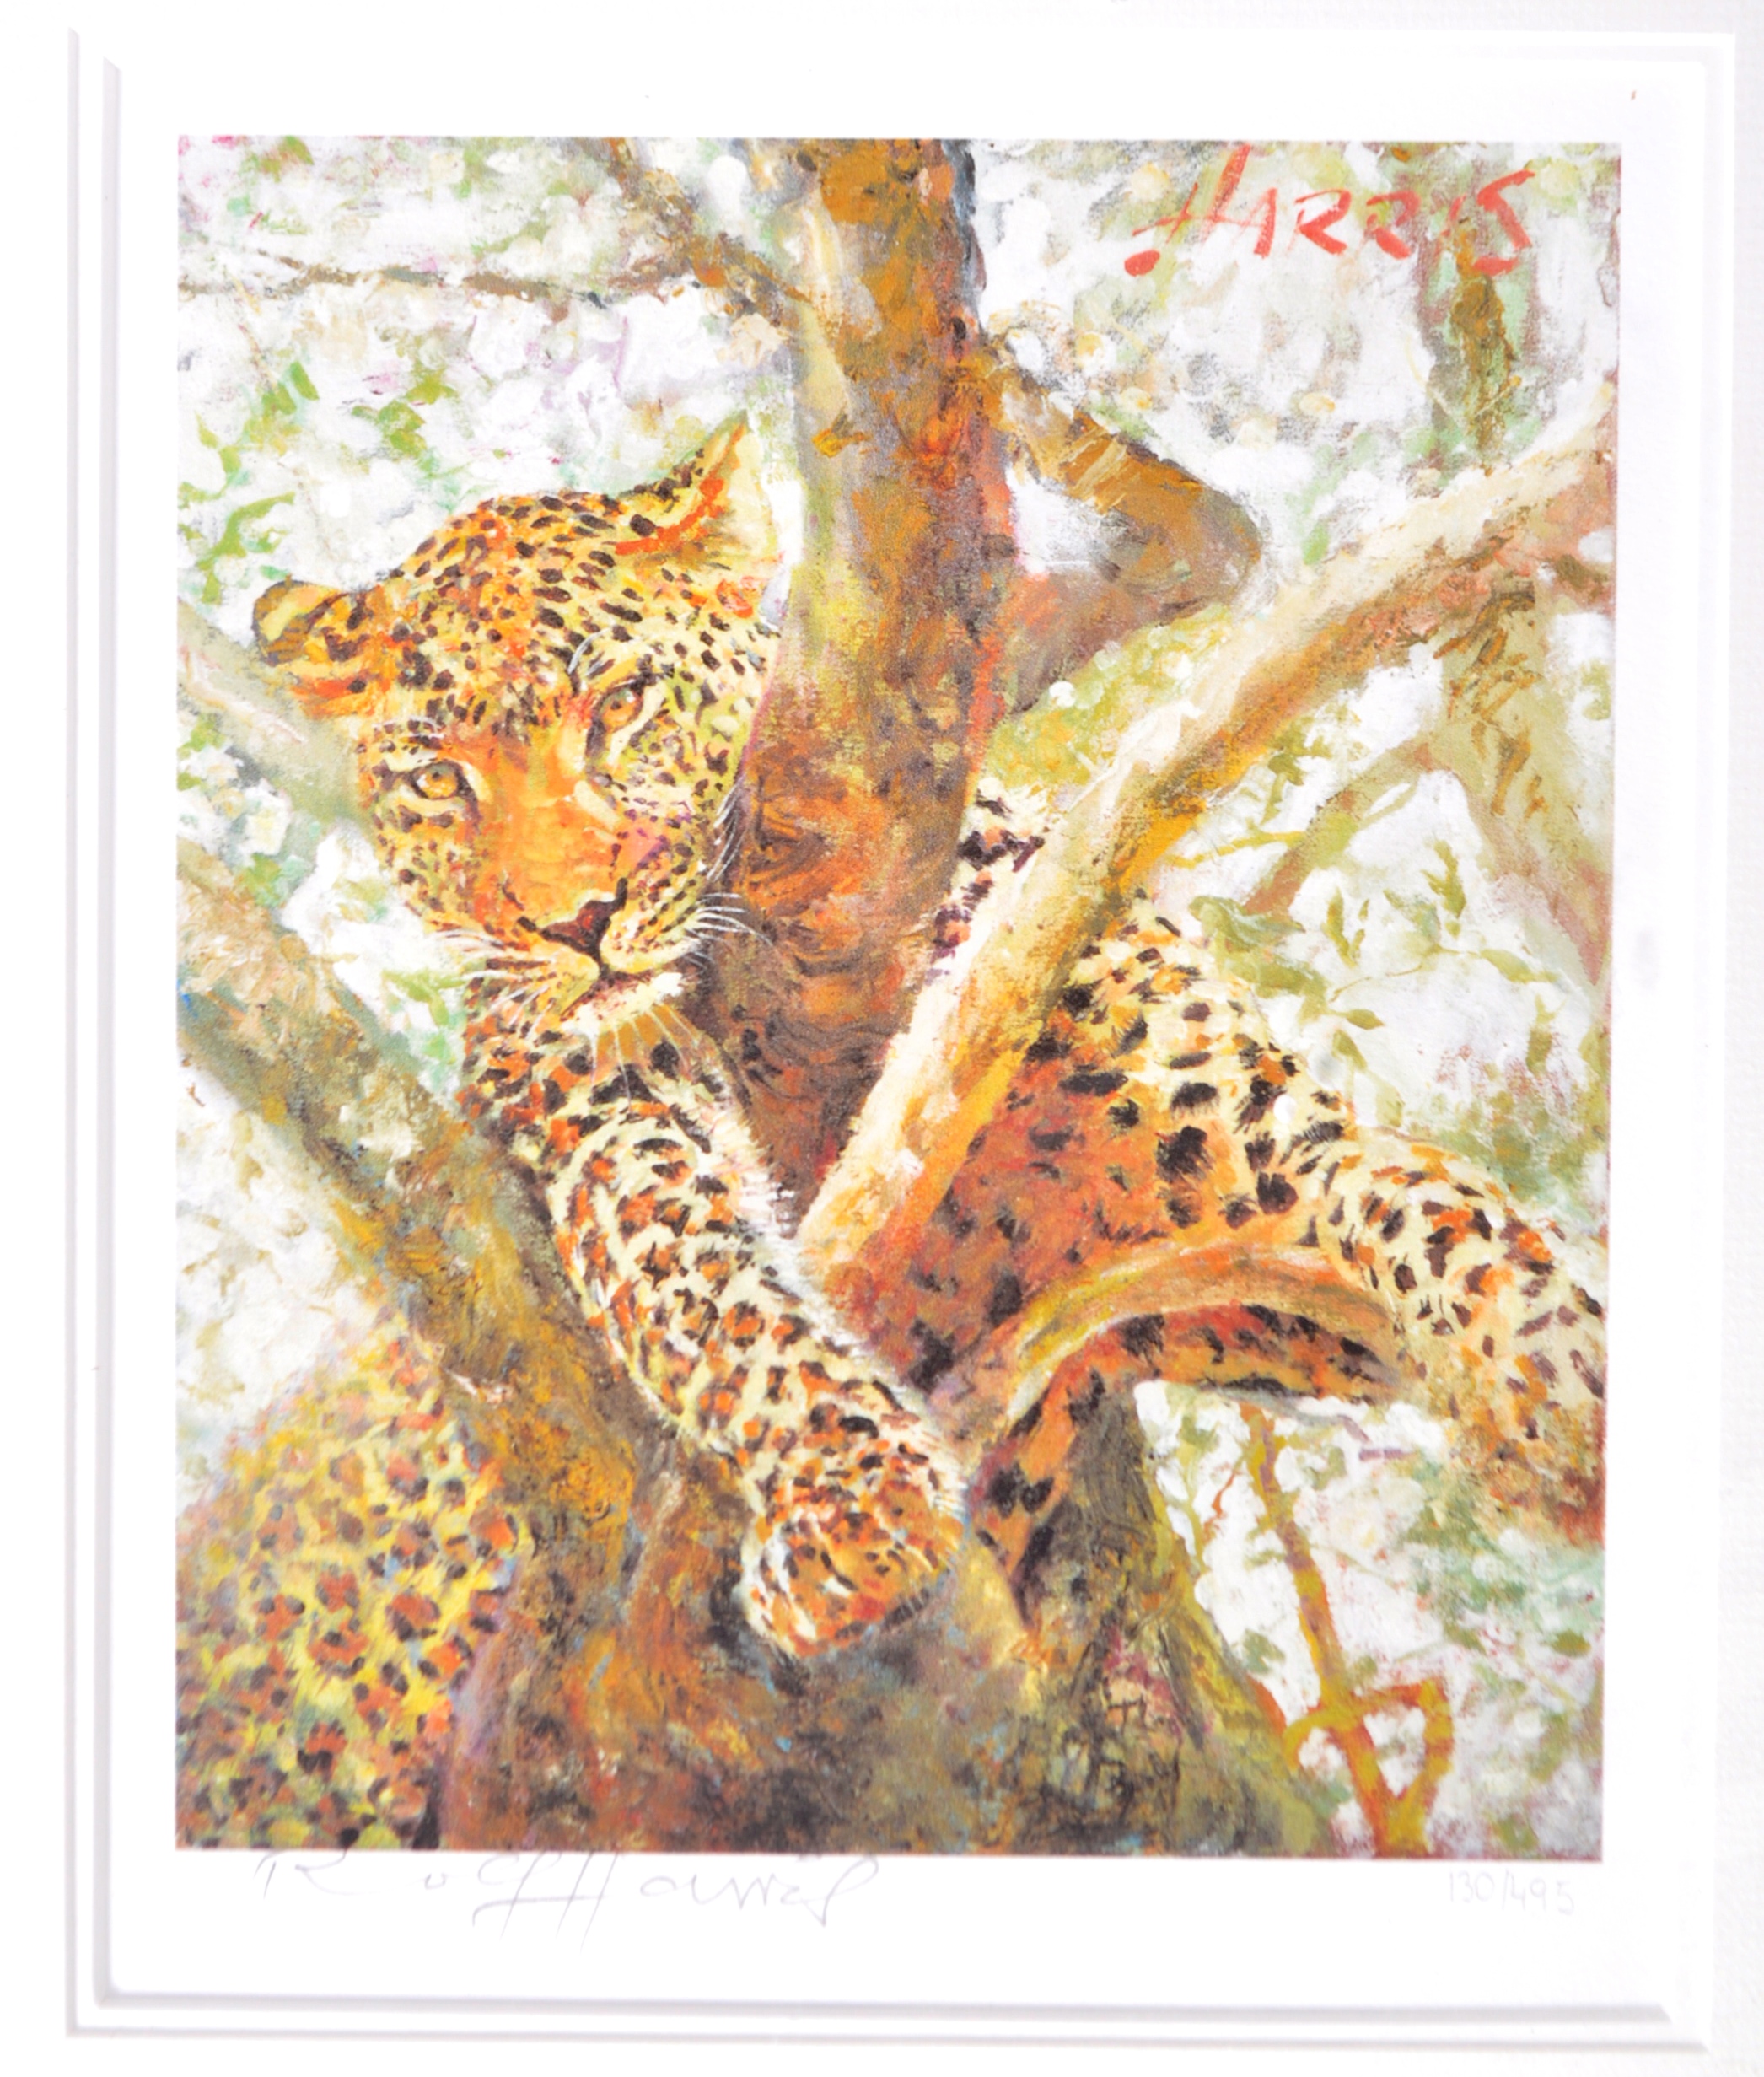 ROLF HARRIS - WORLD OF WILDLIFE SIGNED PRINT AND BOOKS - Image 3 of 8